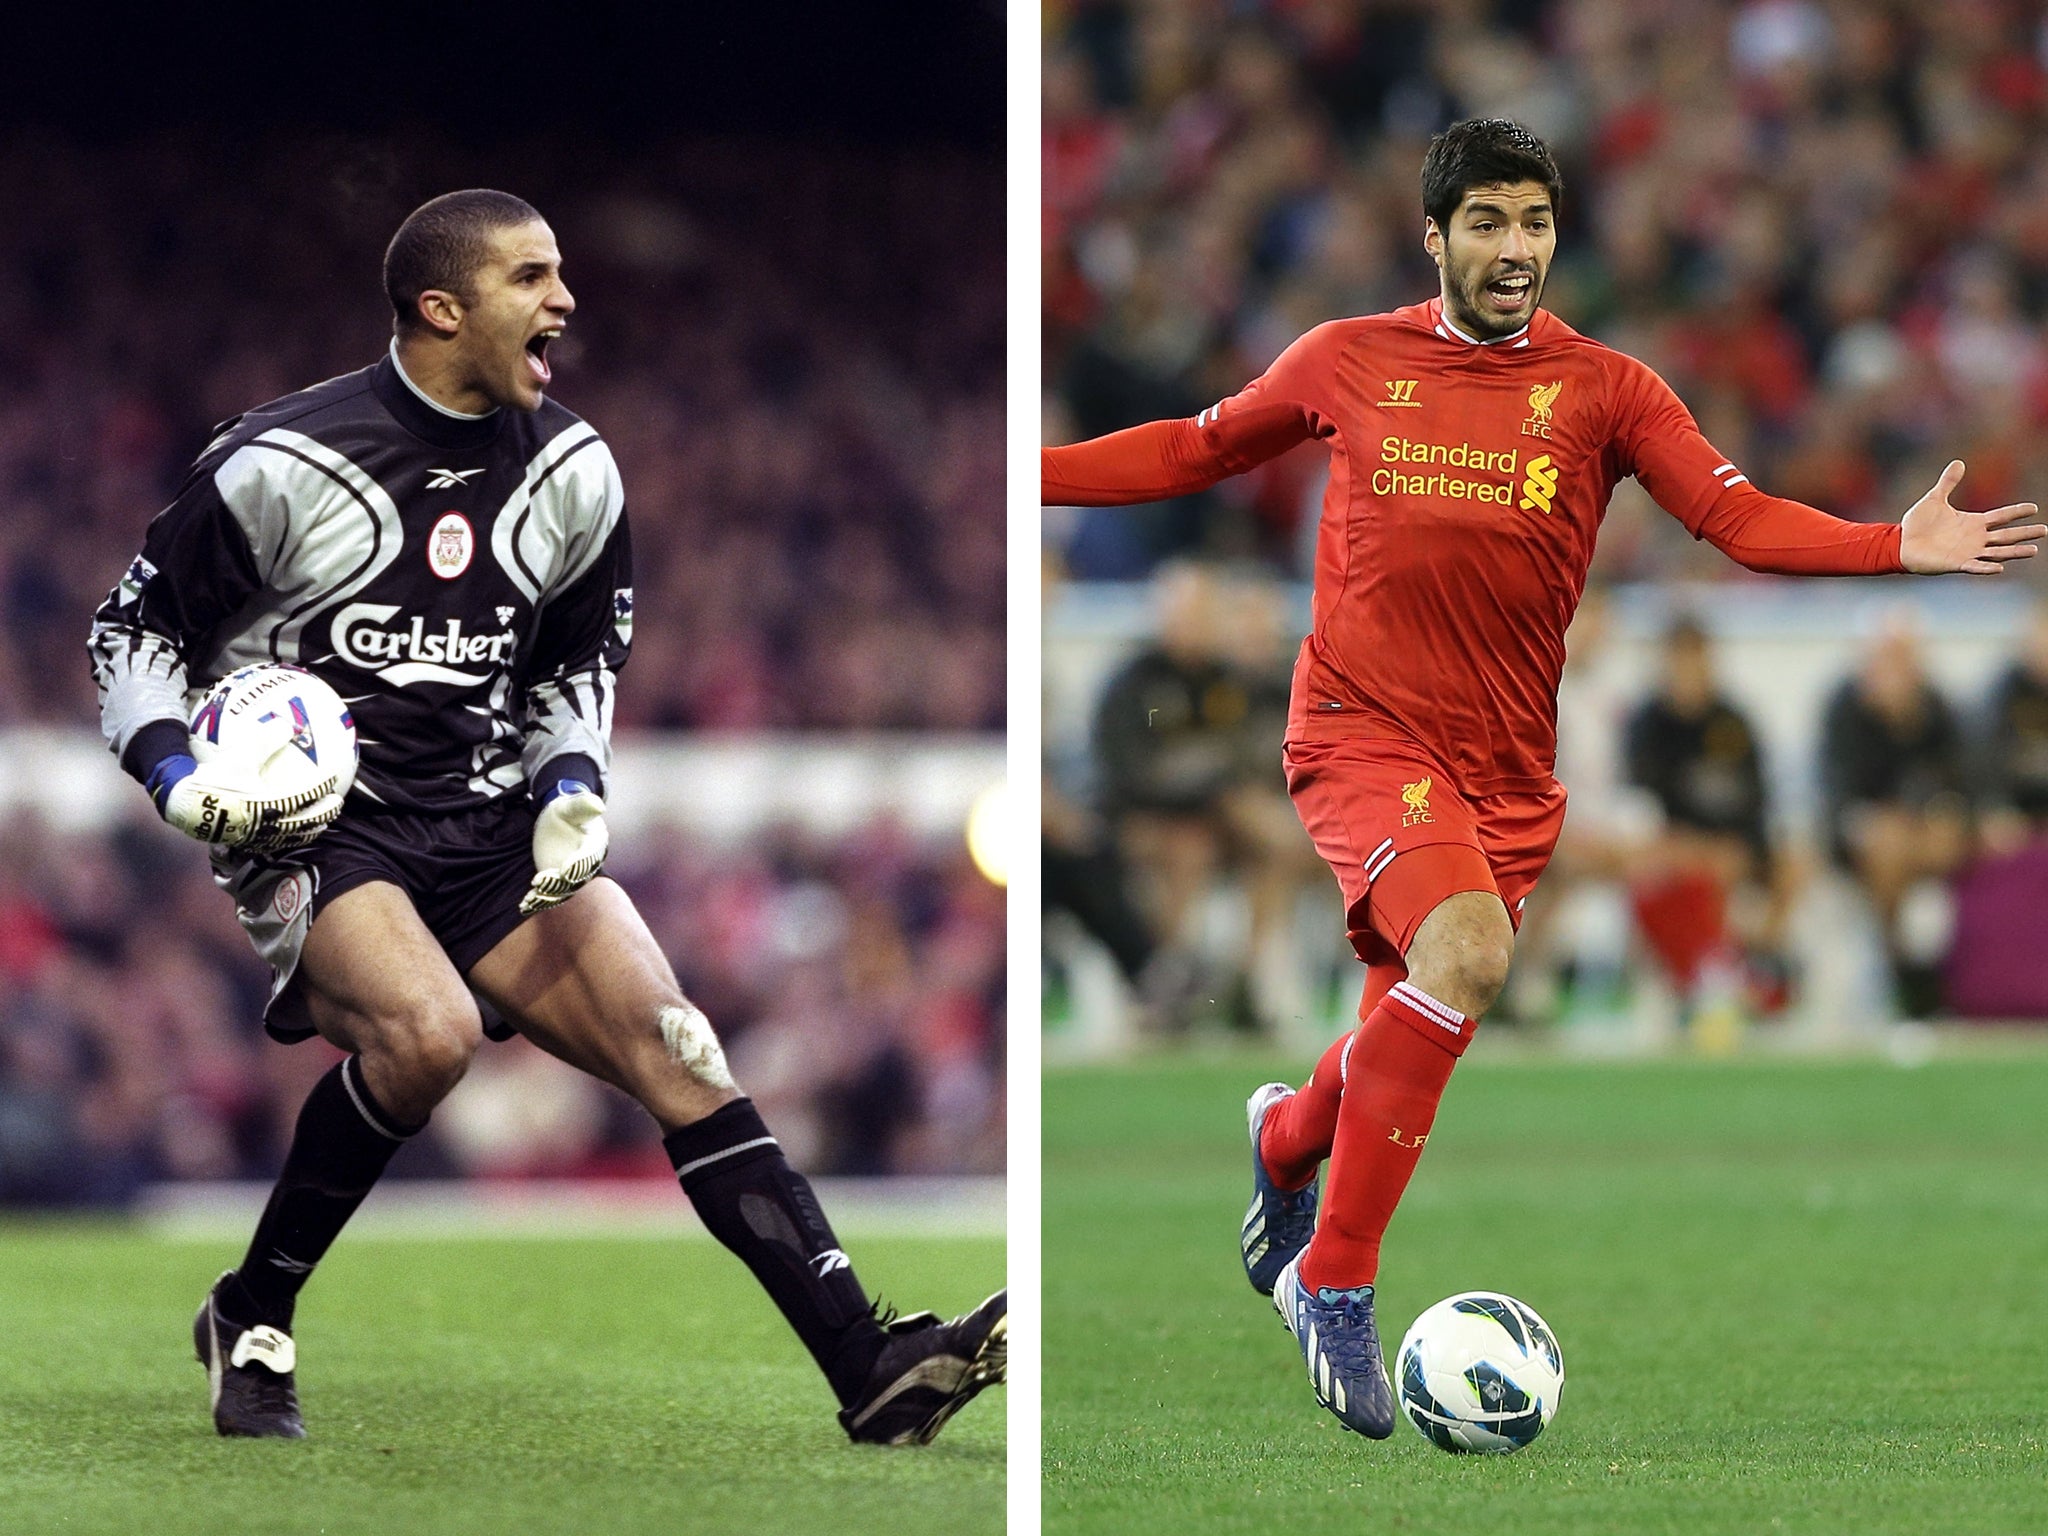 David James has claimed Liverpool are better off without striker Luis Suarez